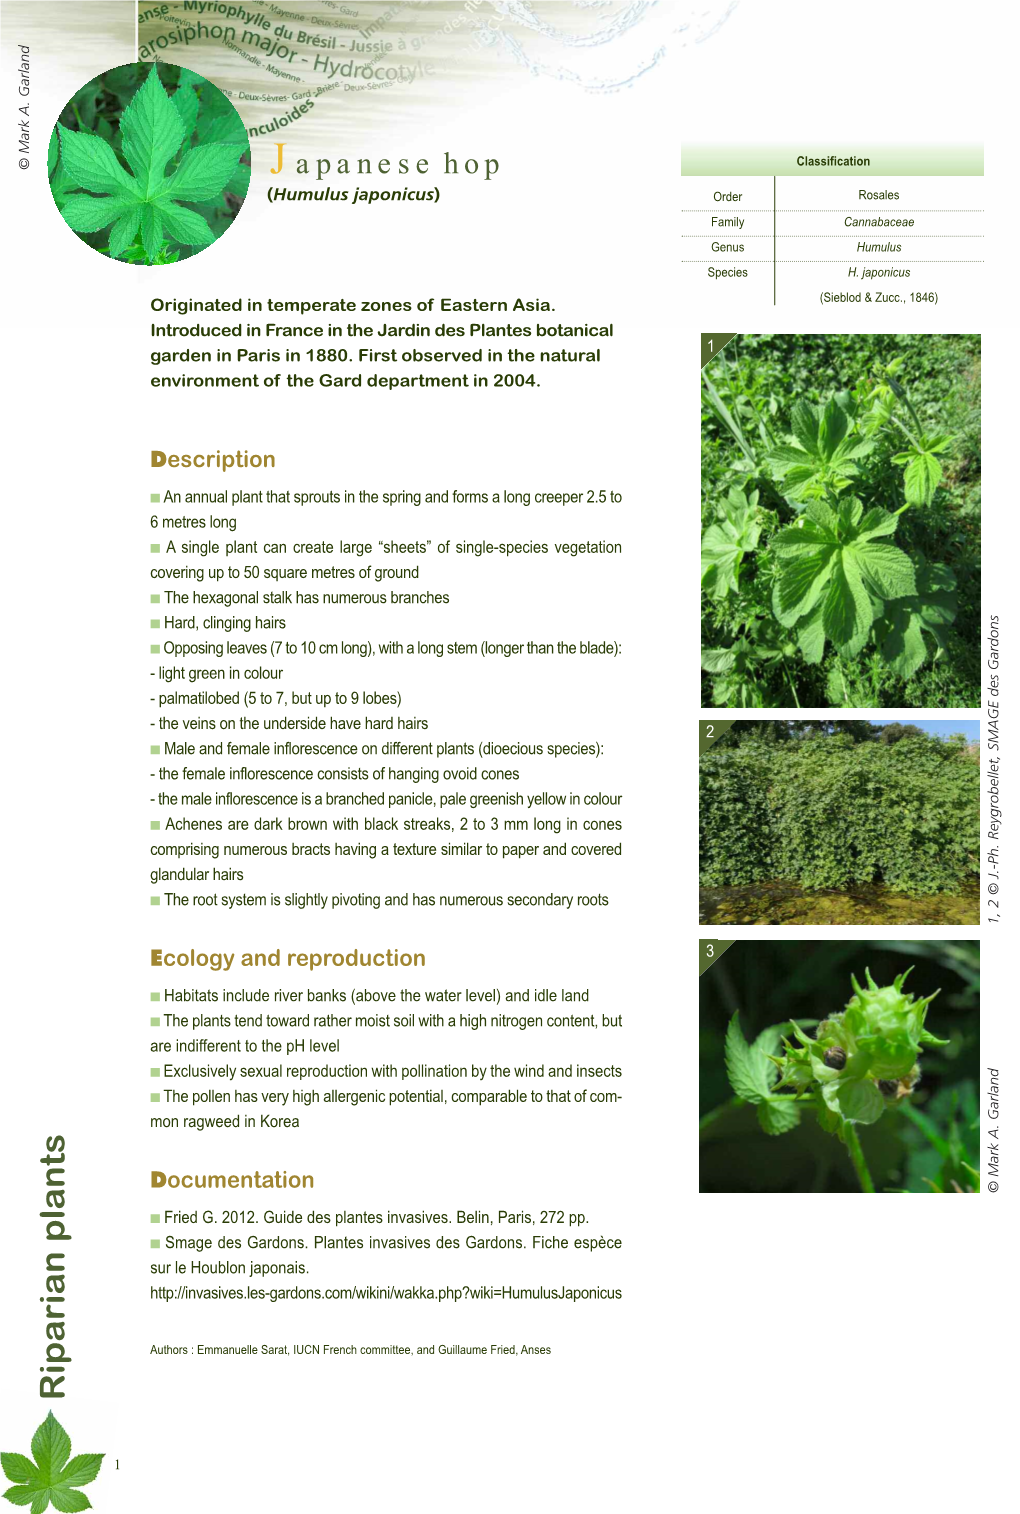 Species Fact Sheet for Humulus Japonicus